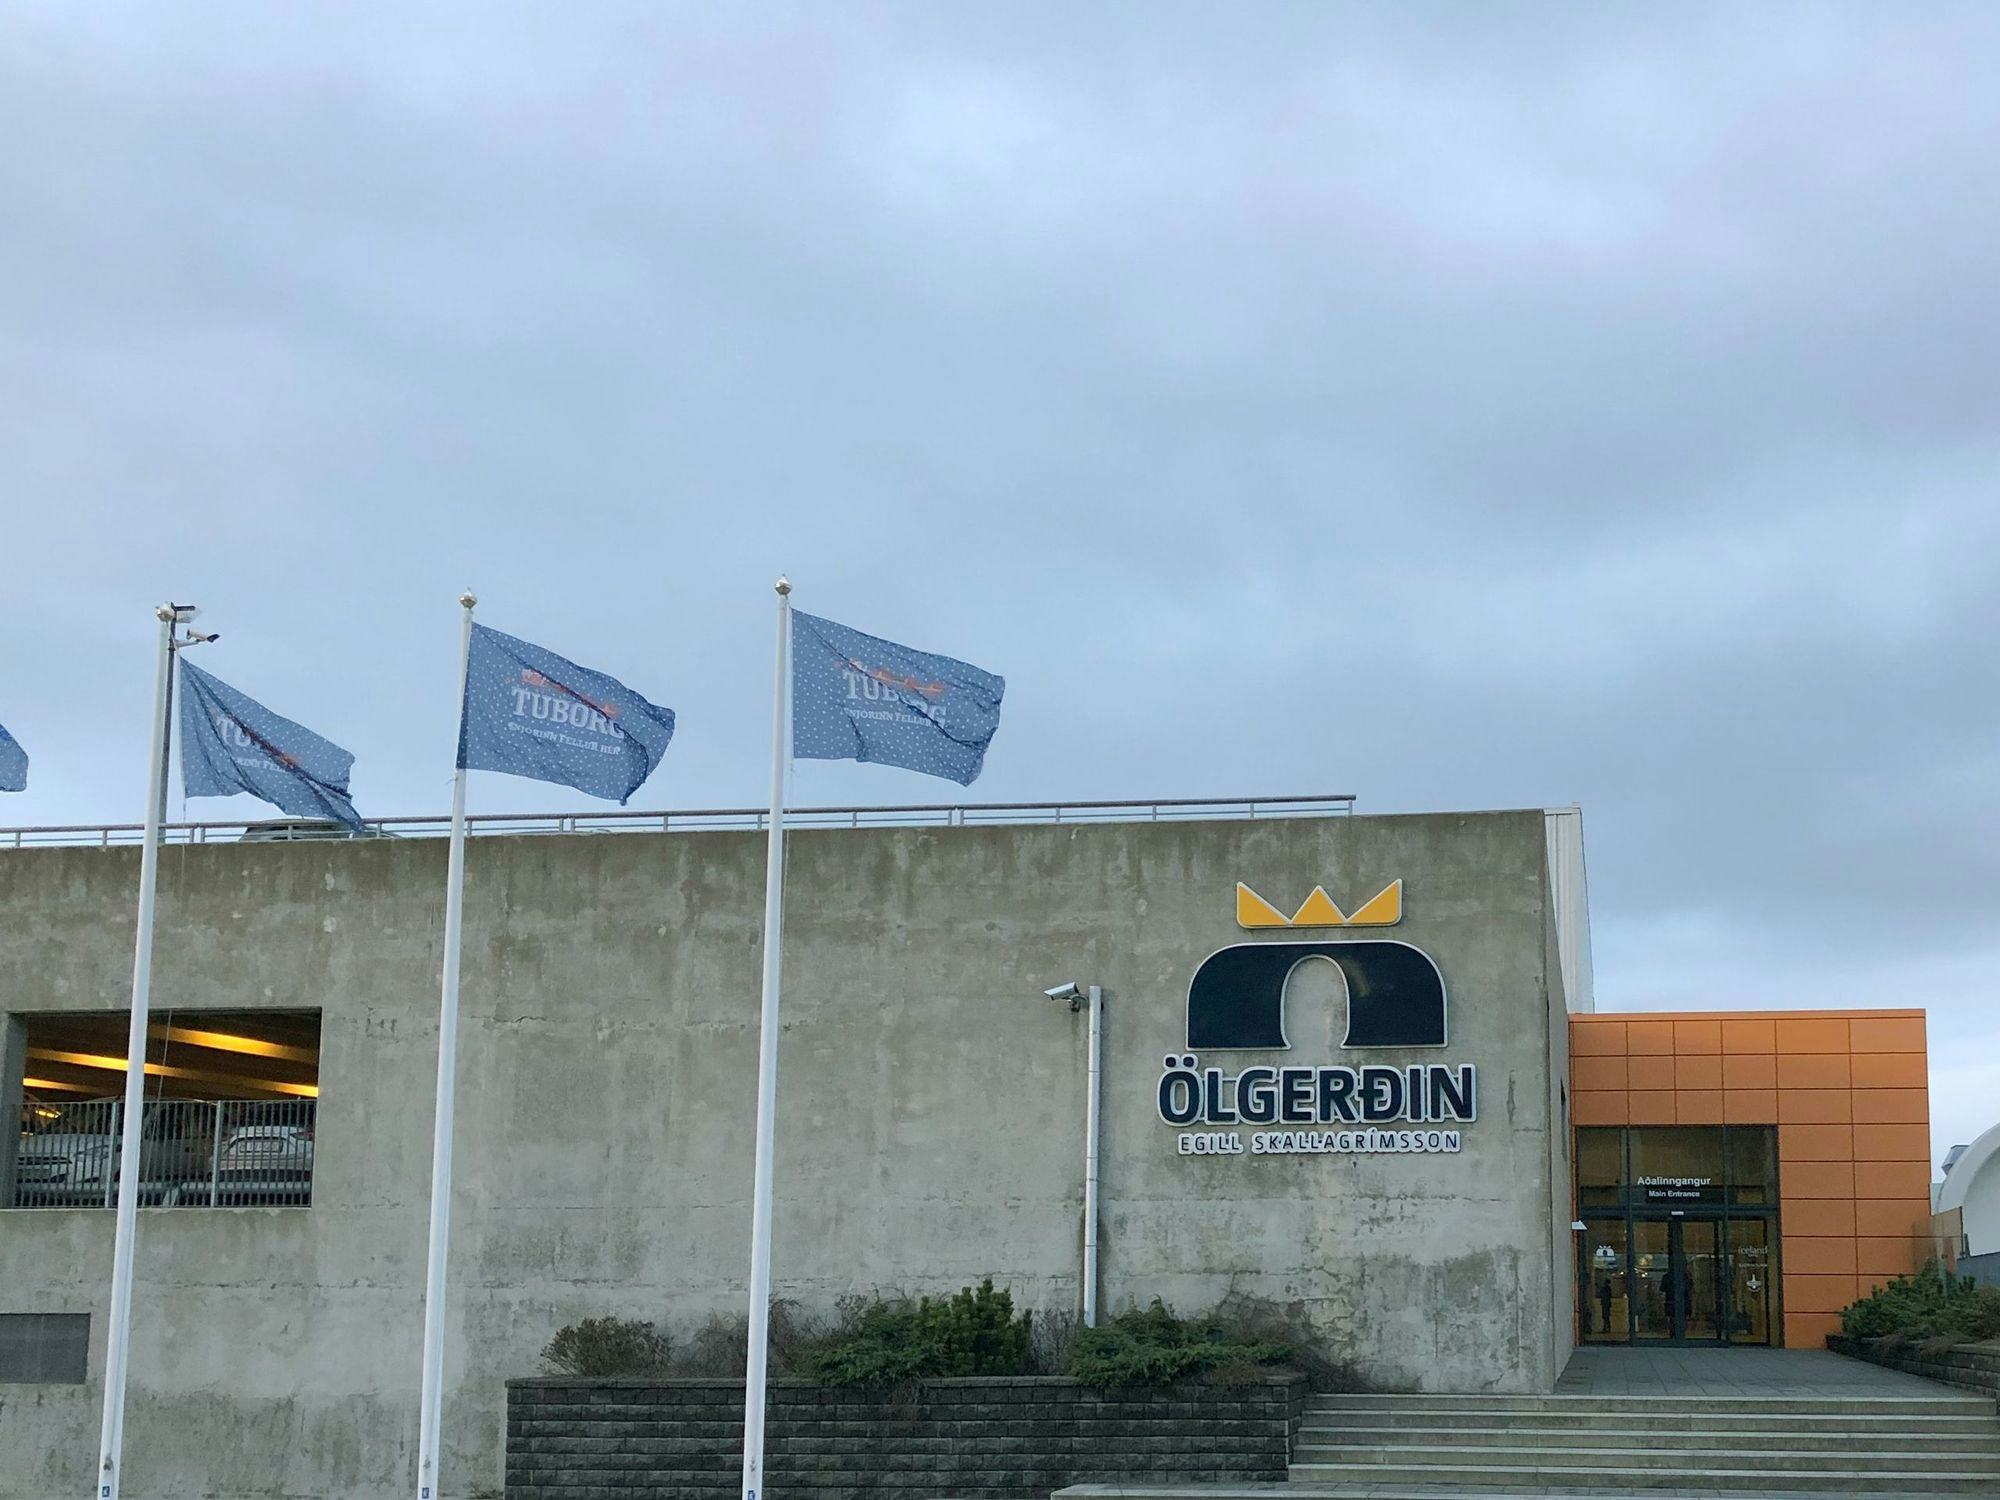 The image displays the front of a building with "Olgerdin" logo and three flags fluttering in the wind